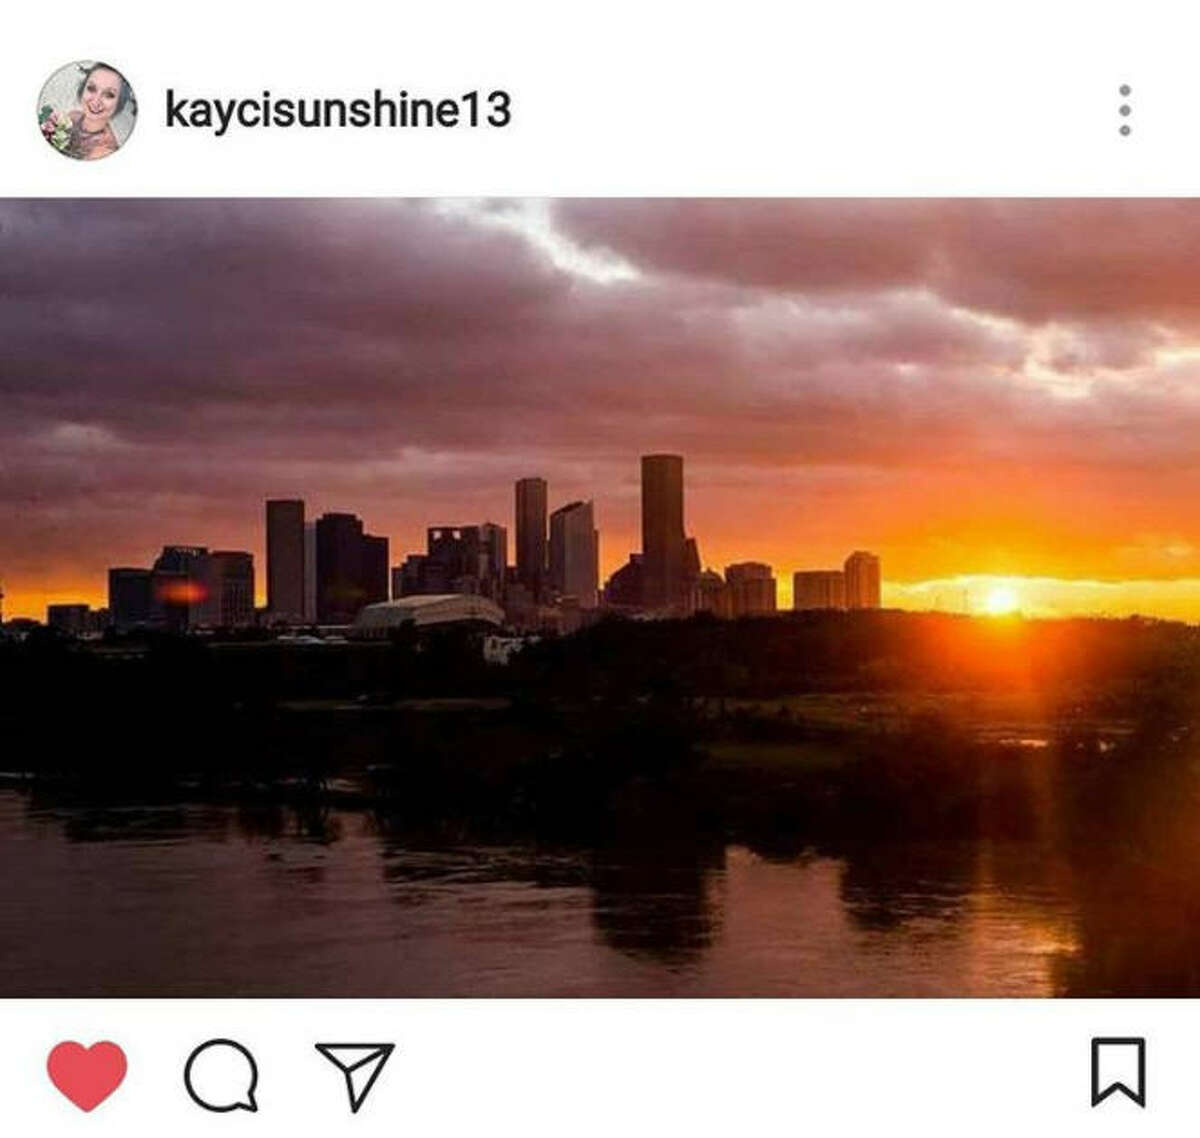 People began sharing photos of sunlight peeking through after days of heavy rain and catastrophic flooding brought on by Hurricane Harvey.Source: Instagram